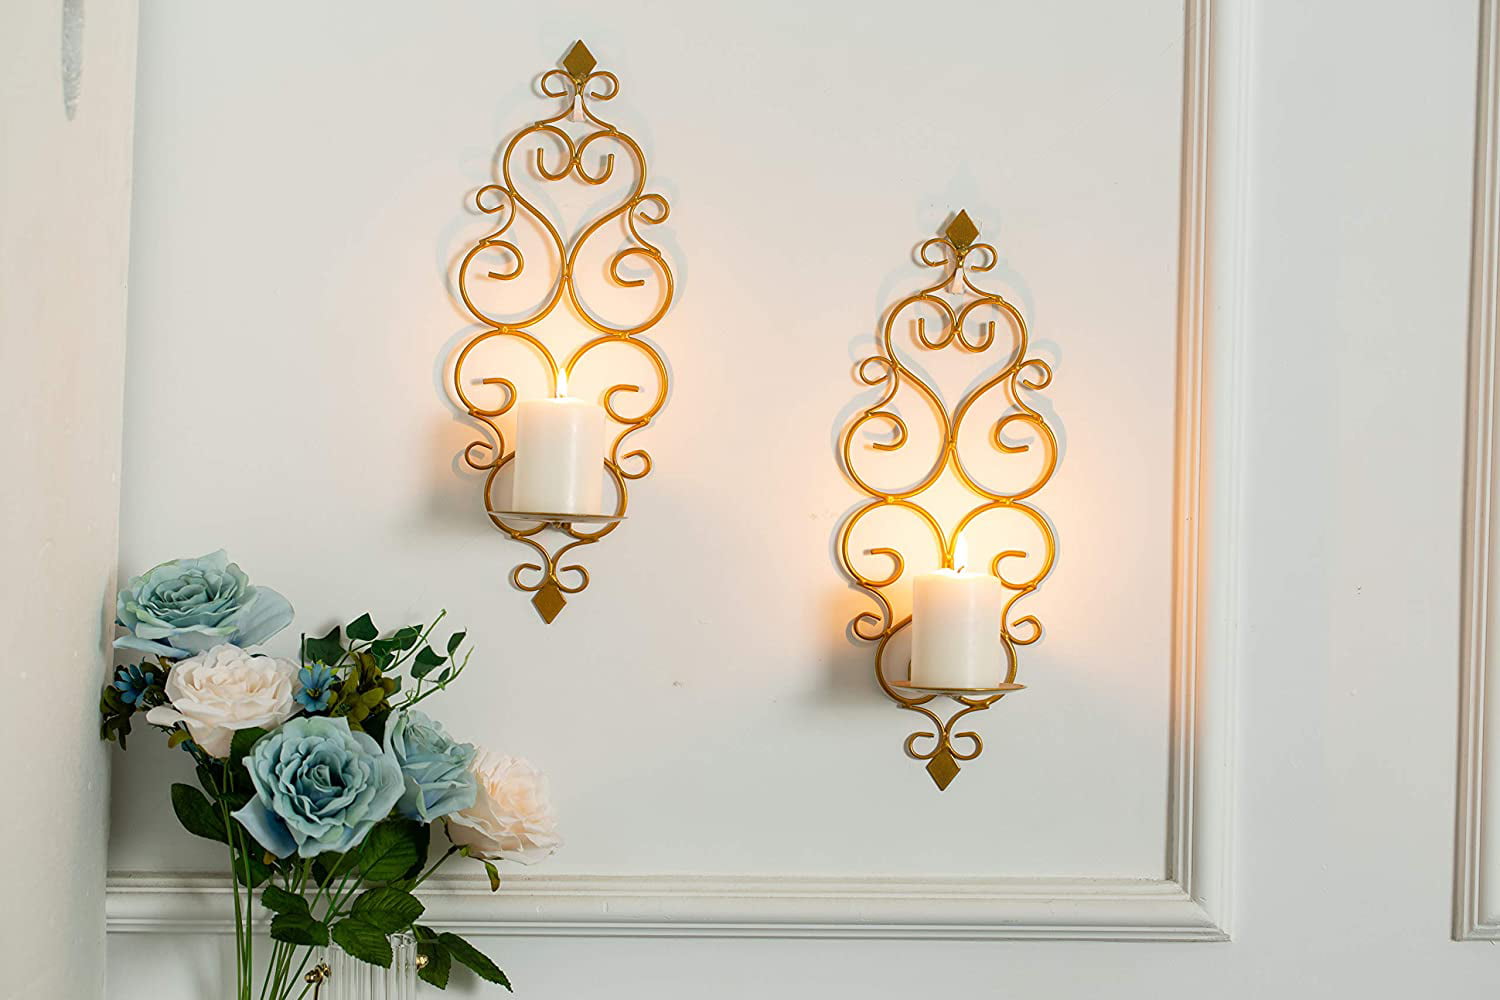 Wall Sconces Decor for Bedroom Dining Room Living Room,Black Iron Wall Candle Sconce Holder Set of 2 Hanging Wall Mounted Pillar Candle Sconces Holder 